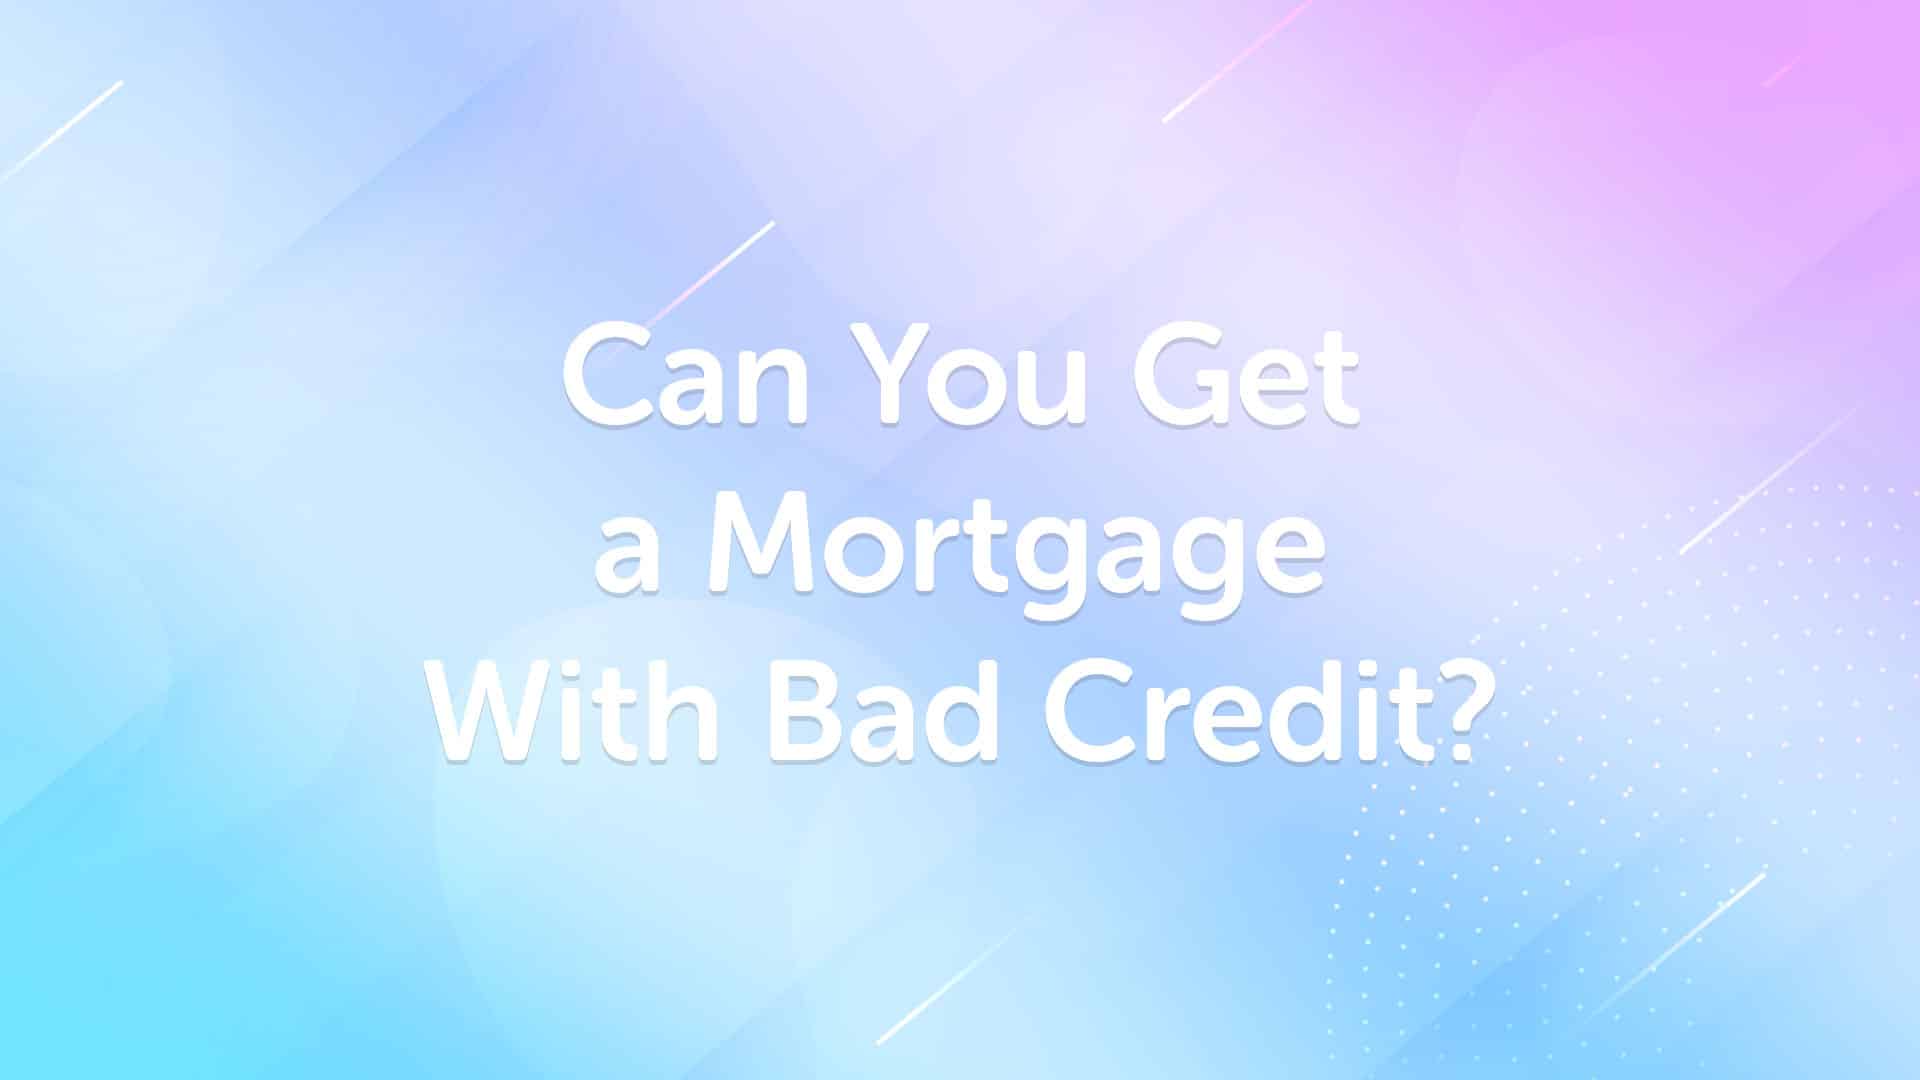 Can You Get a Mortgage With Bad Credit in Newcastle?